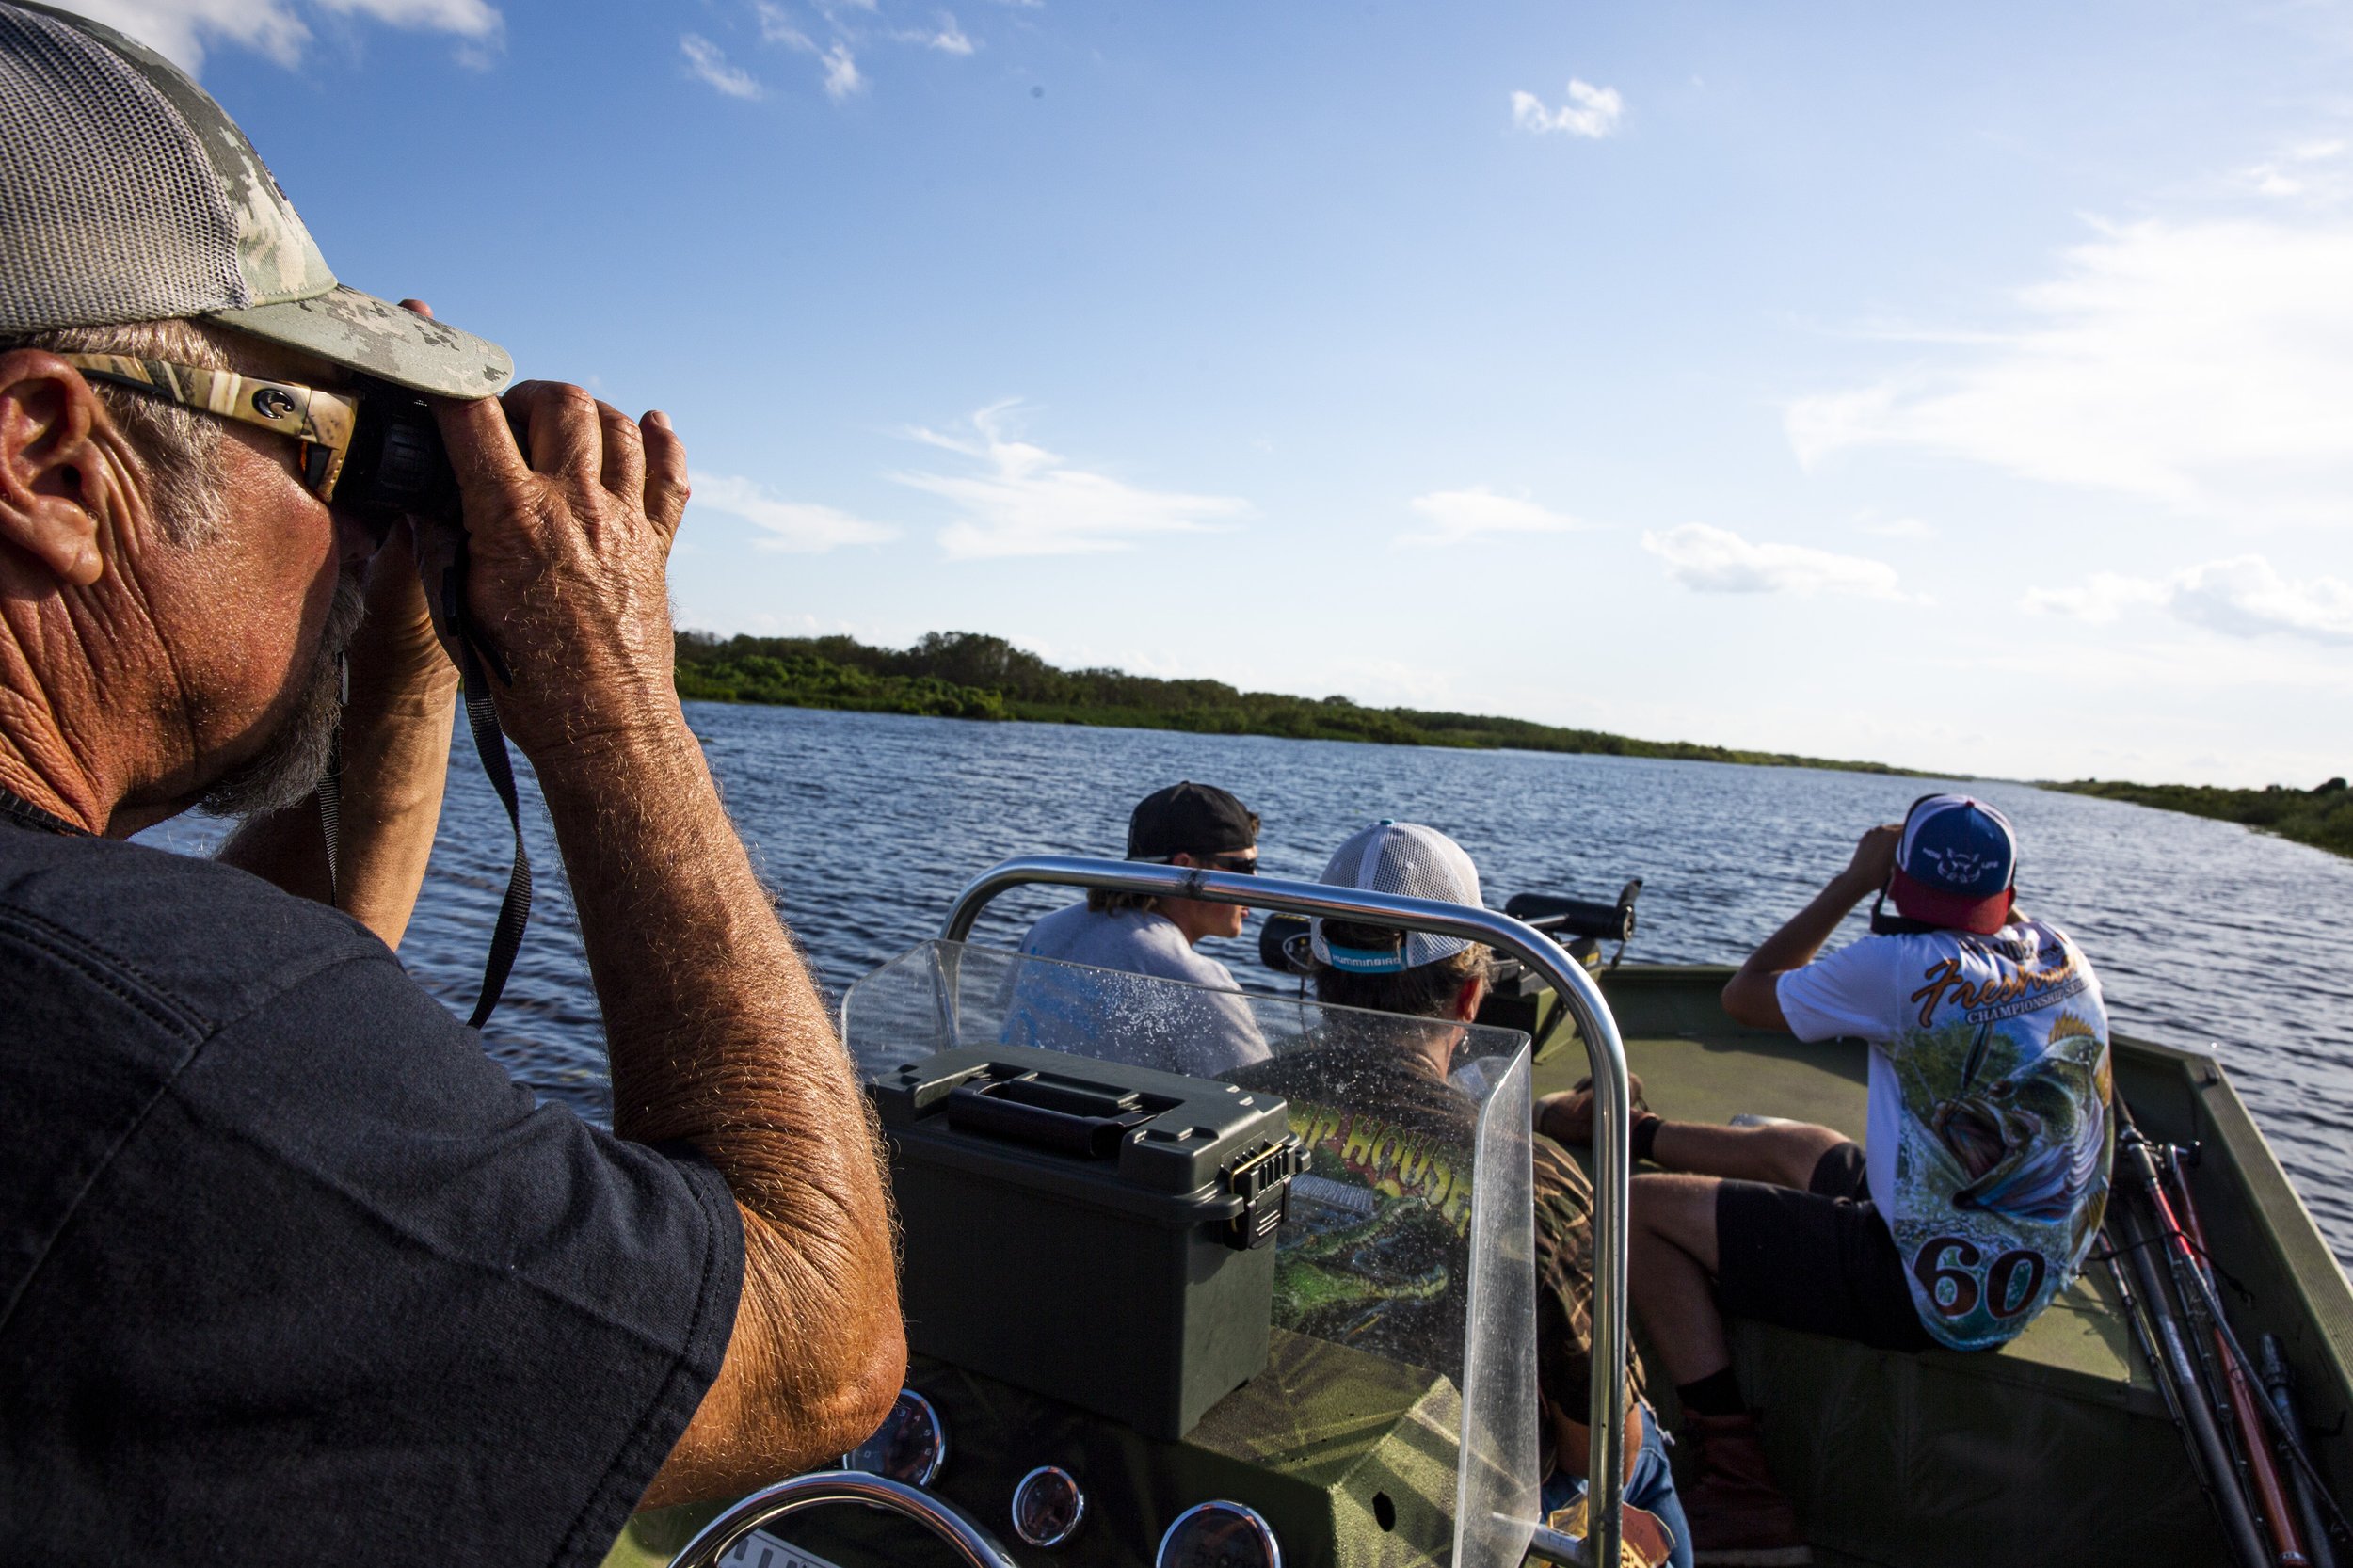  Capt. Bob Stafford looks out of binoculars to spot gators during an alligator hunt with Okeechobee Charters on Lake Okeechobee Friday, Sept. 27, 2019. Alligators were hunted to near extinction in Florida before they became protected in the 1960s, ca